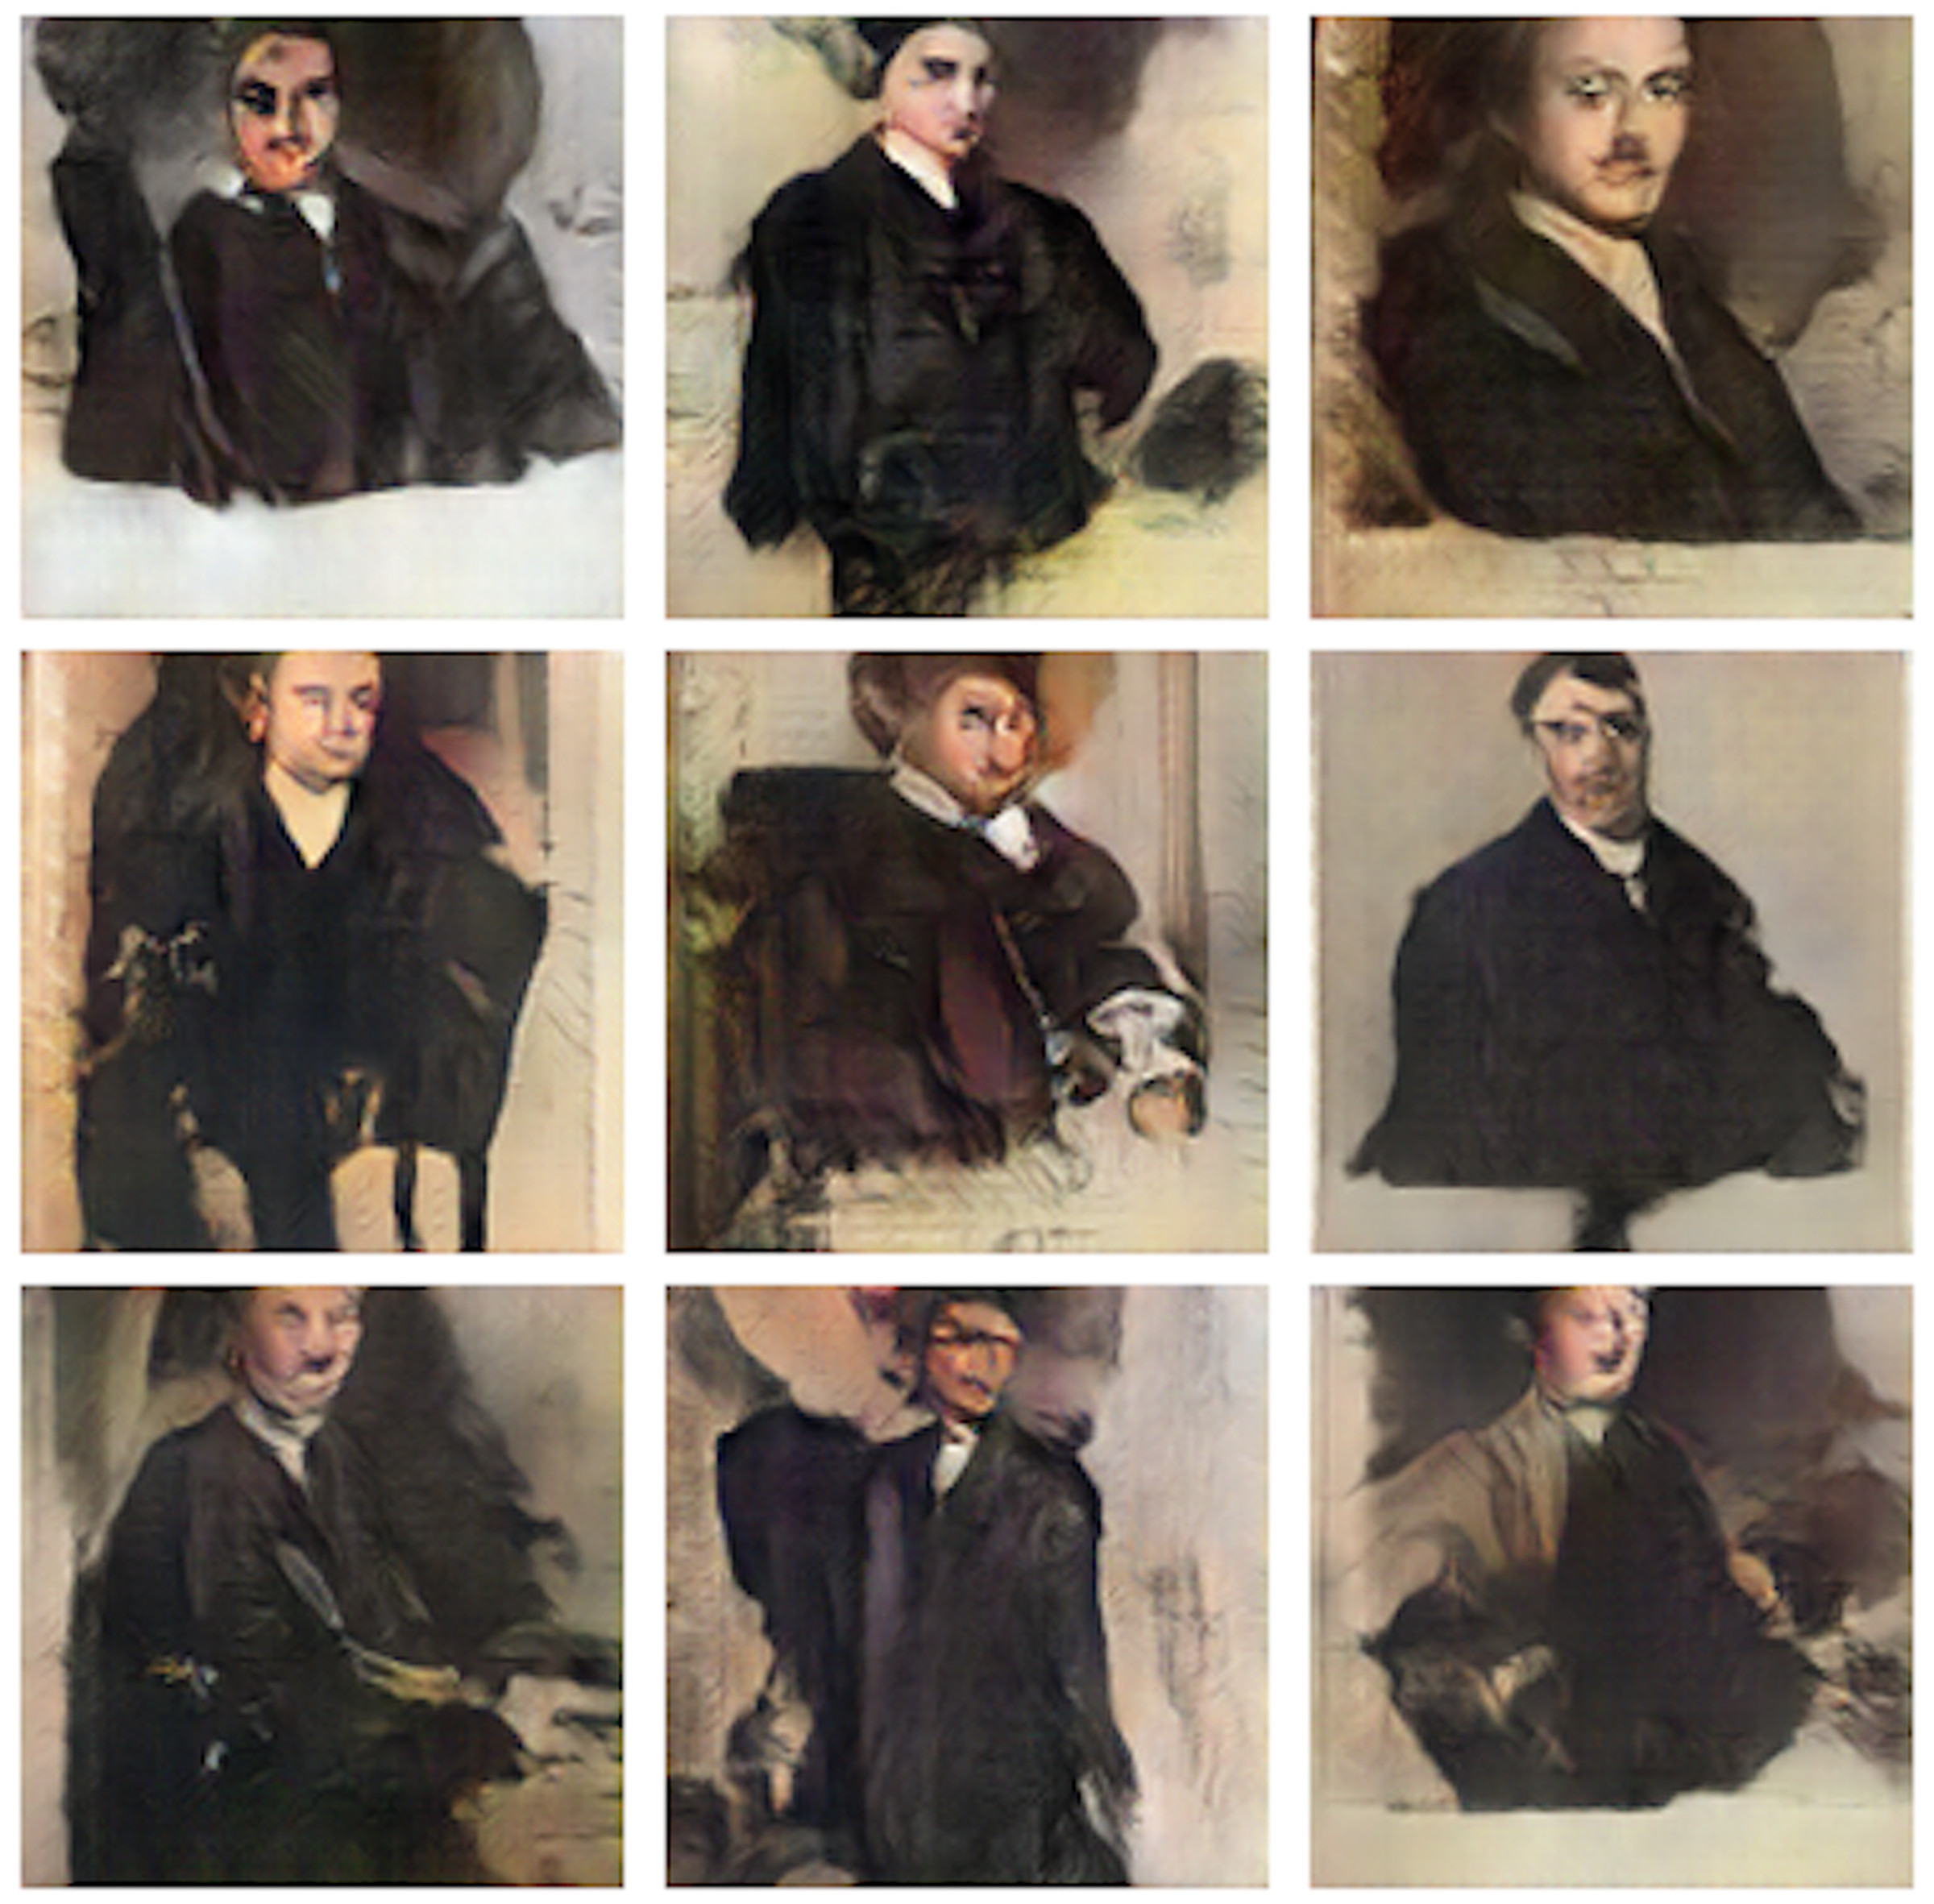 Images generated by White using Barrat’s code bear a striking resemblance to the Belamy portraits. 